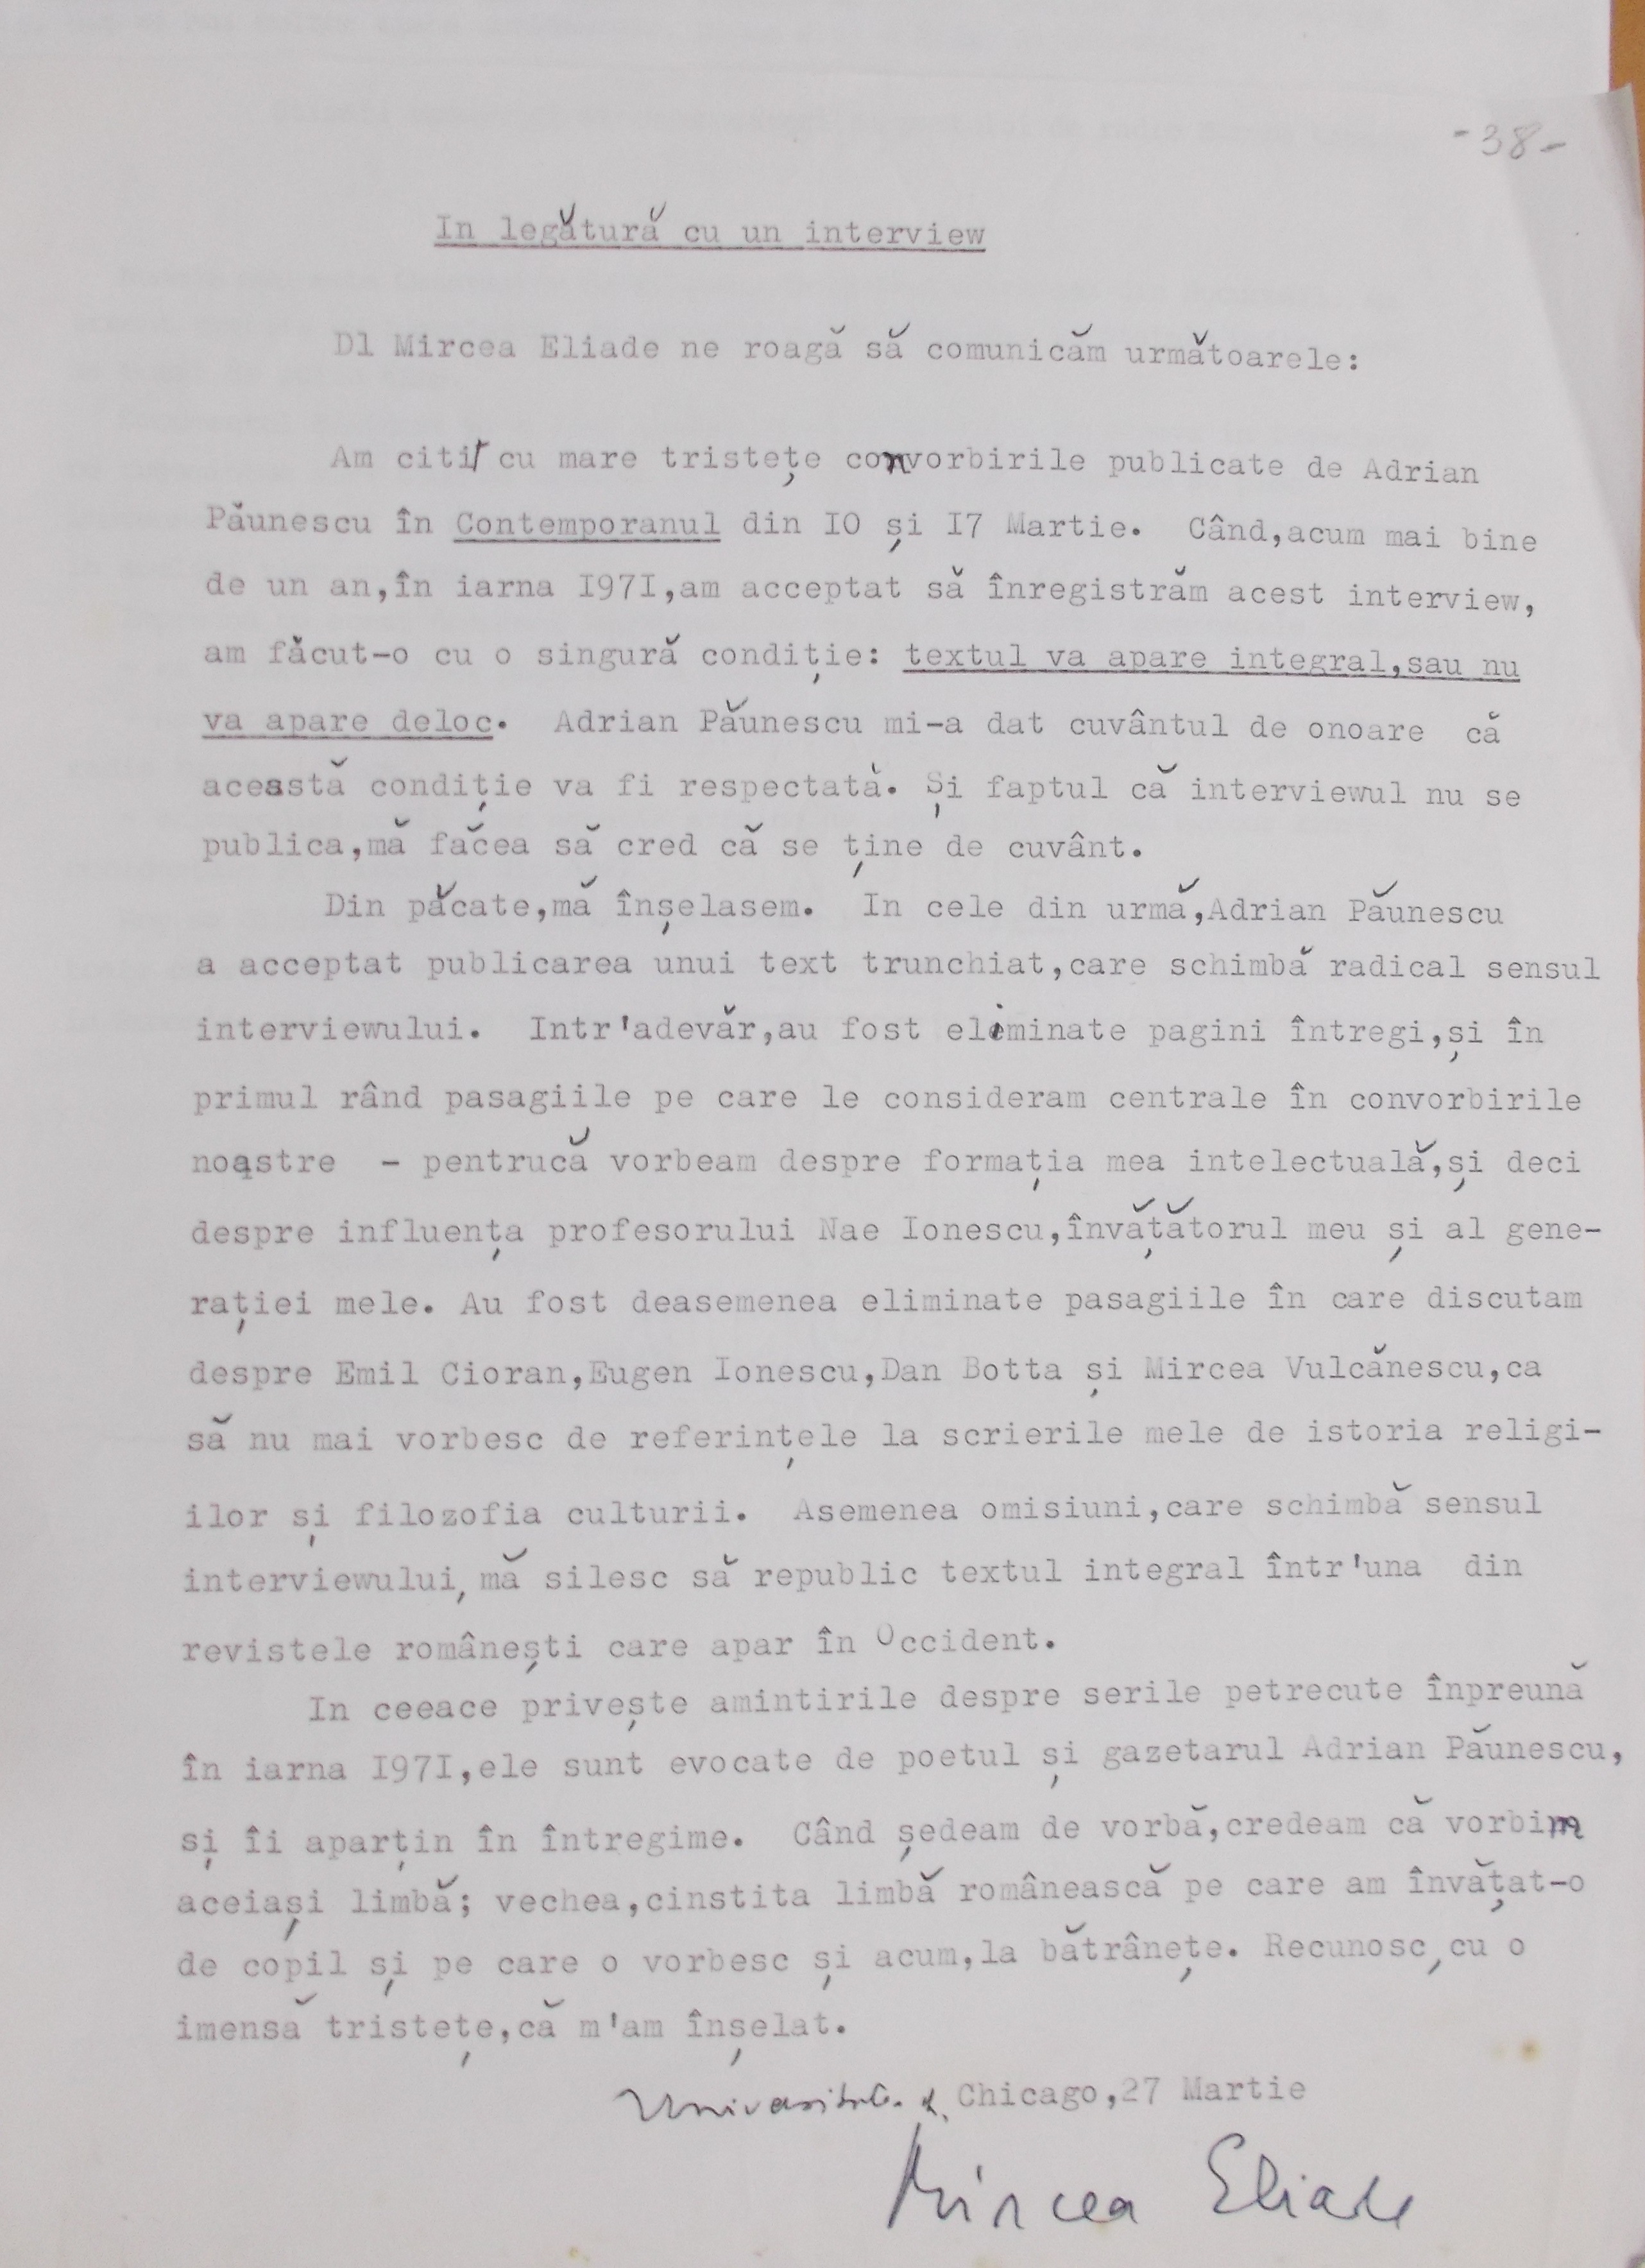 The first page of the letter to Monica Lovinescu sent by Mircea Eliade in March 1971